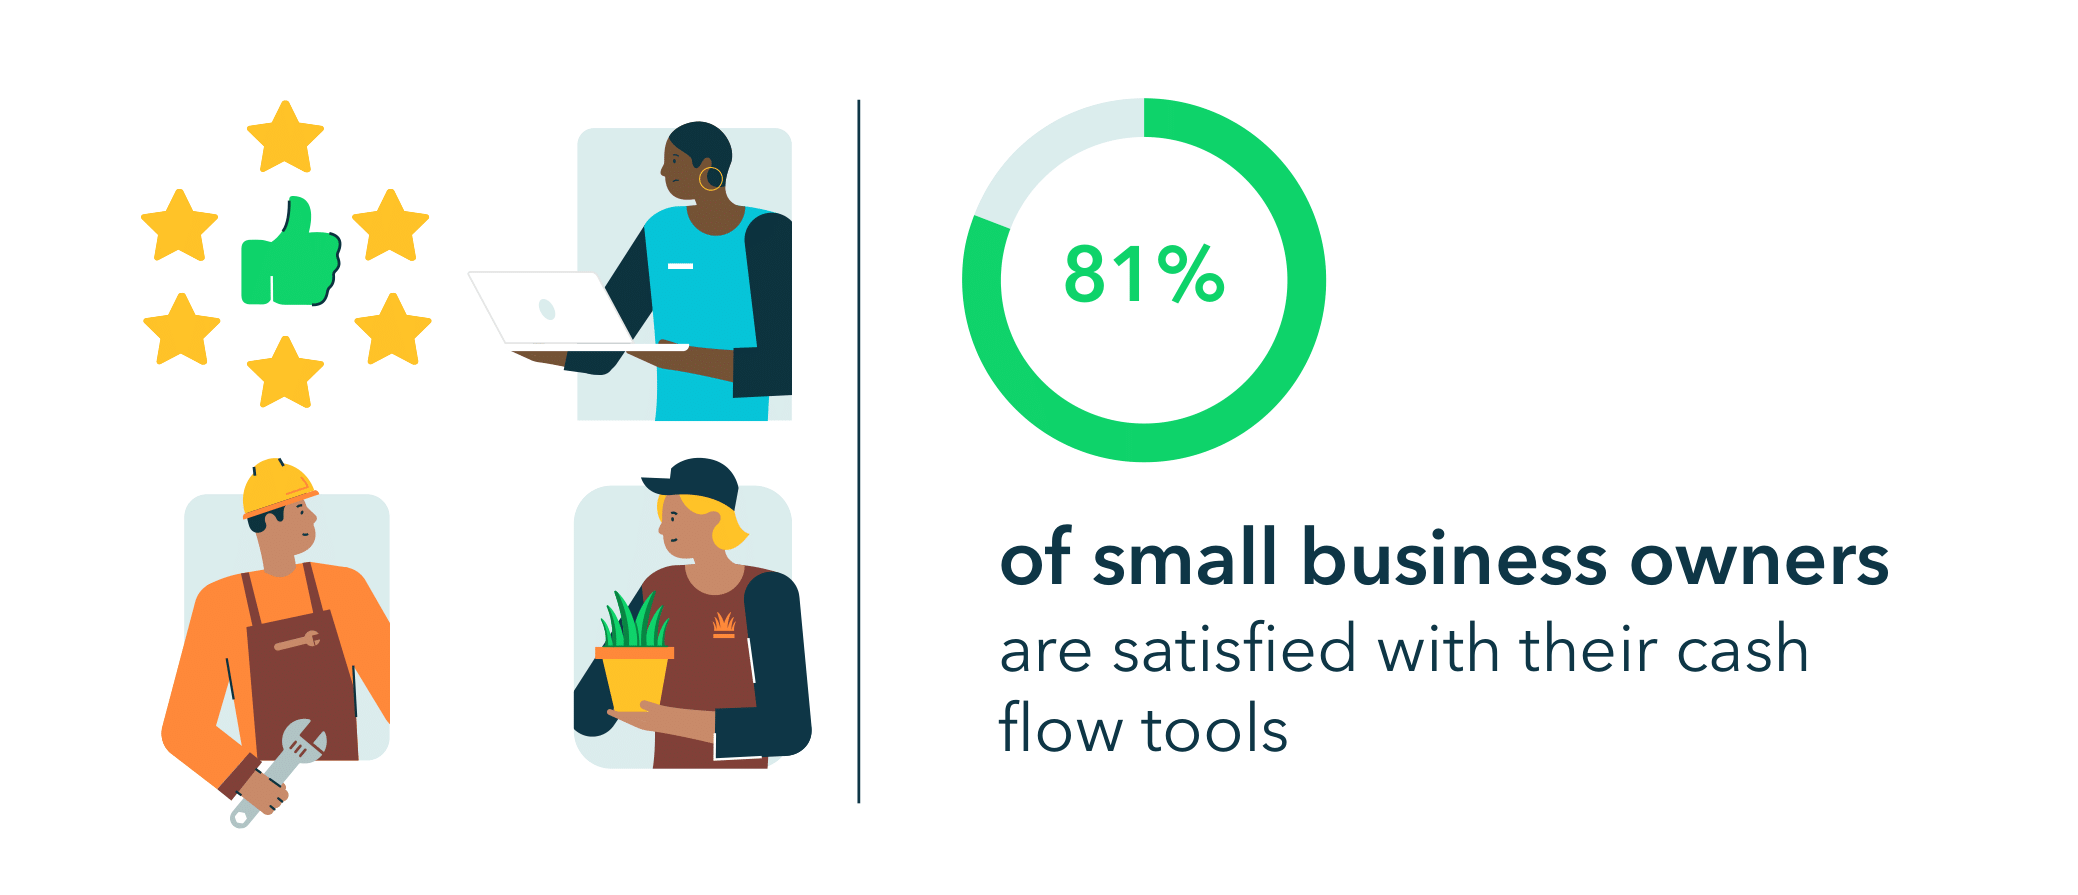 81% of small business owners are satisfied with their cash flow tools.